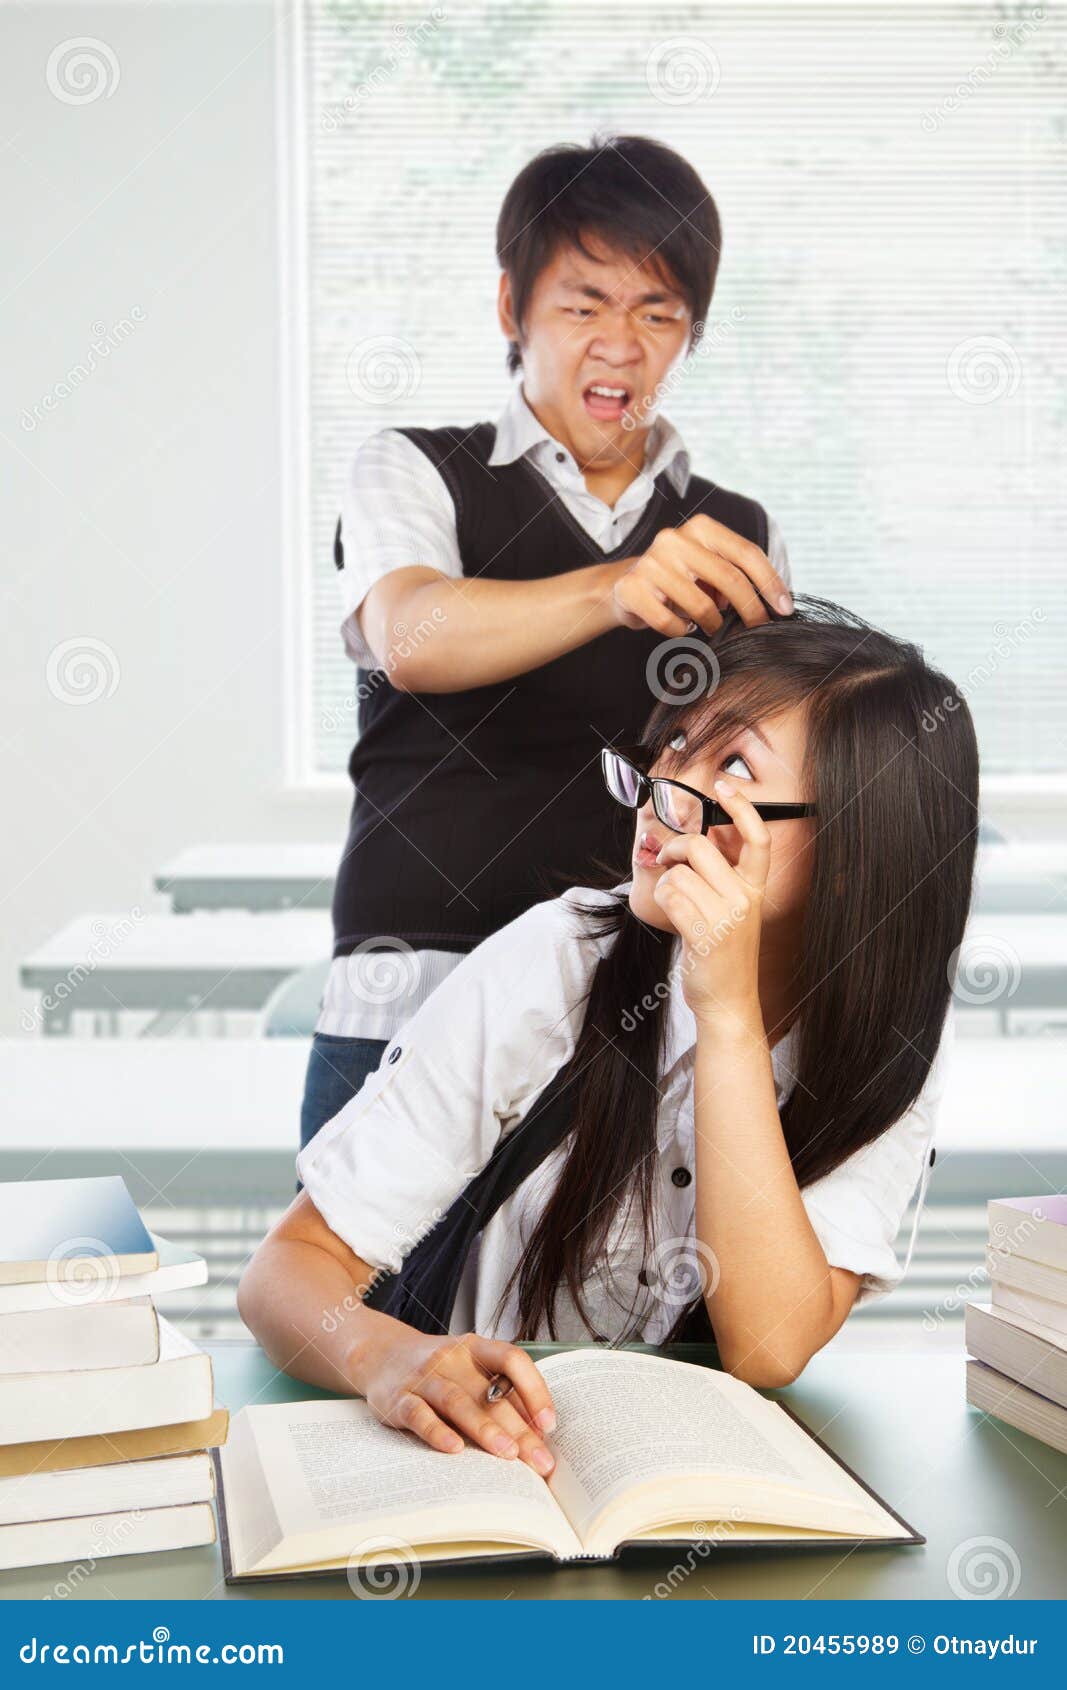 Diligent and bad students stock image. Image of college - 20455989